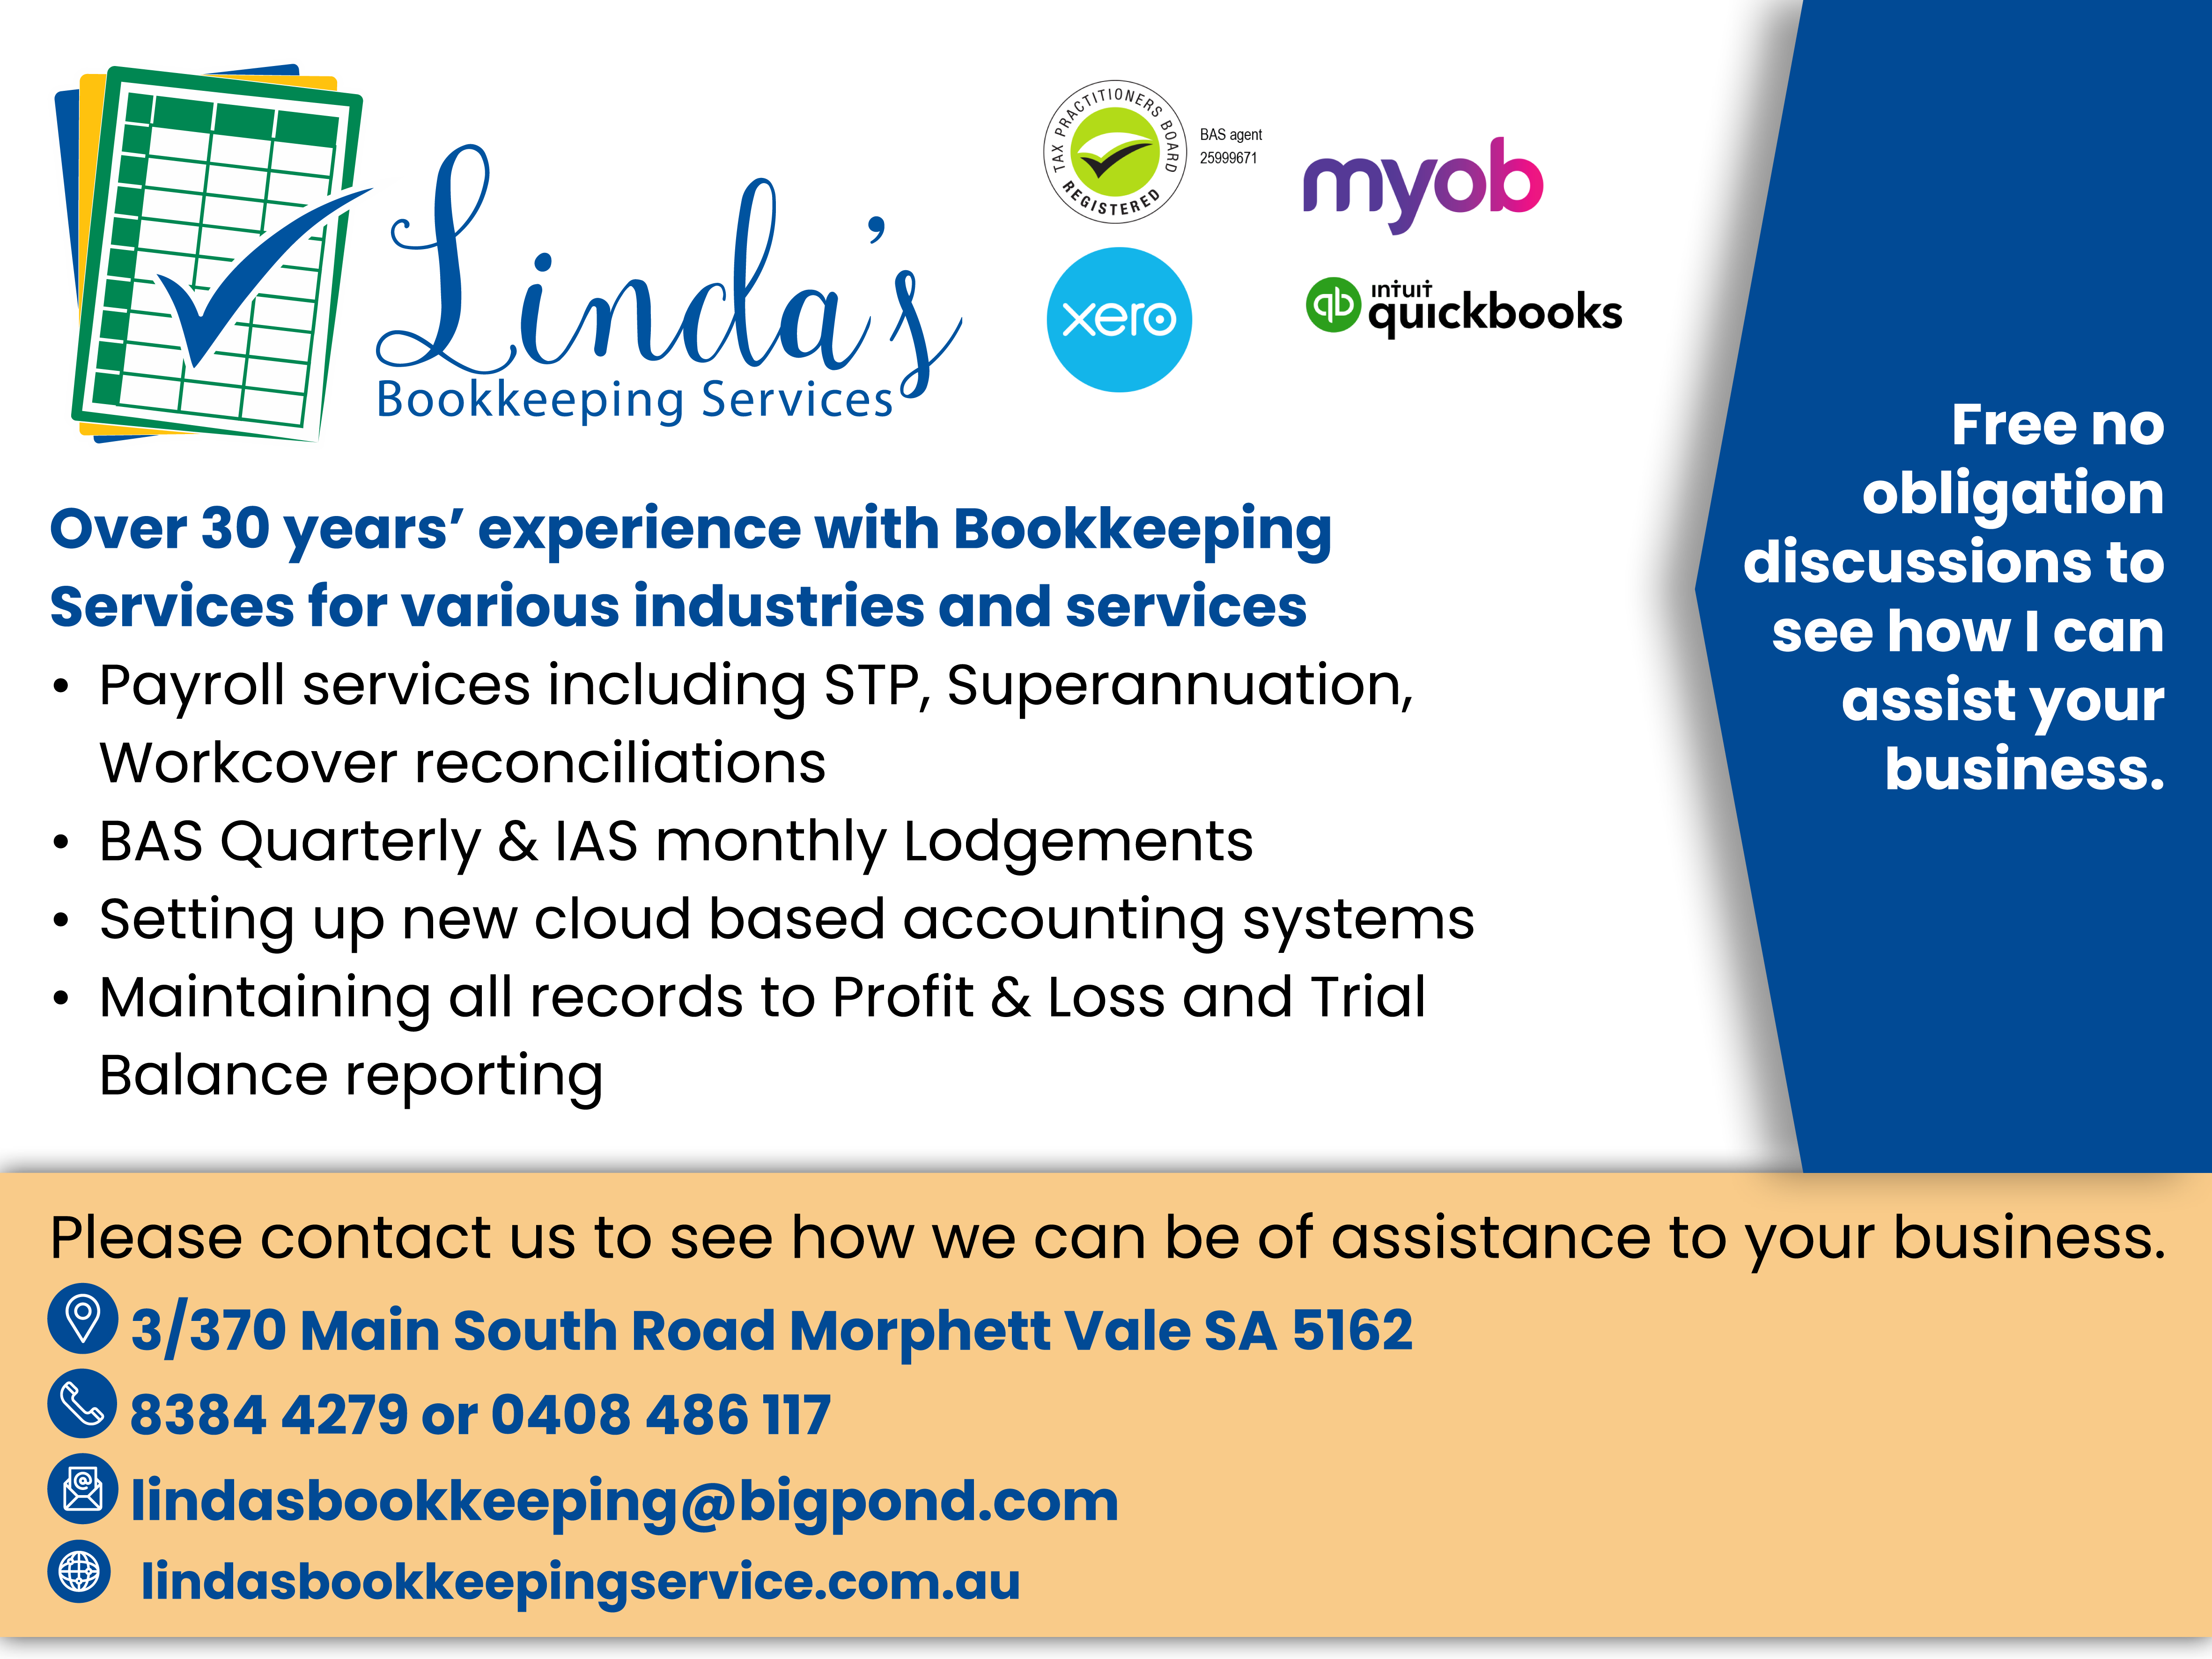 Linda's Bookkeeping Services